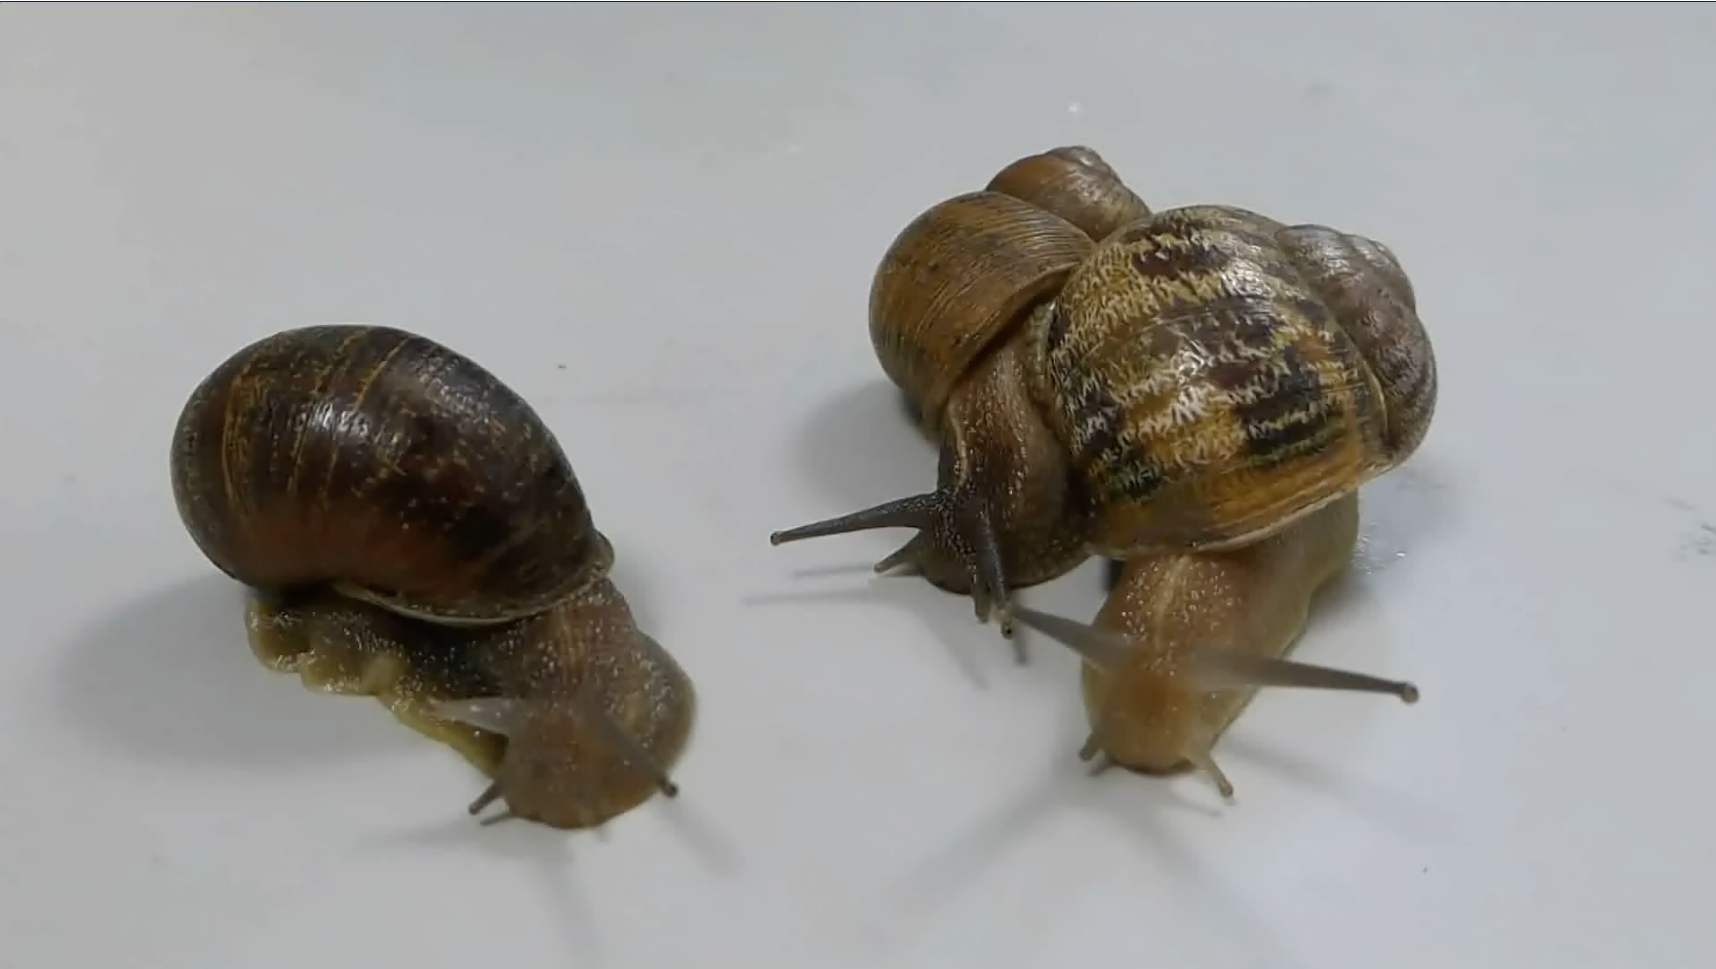 Jeremy the snail turns away as two snails, sent to him as potential mates, decide to mate with each other instead.